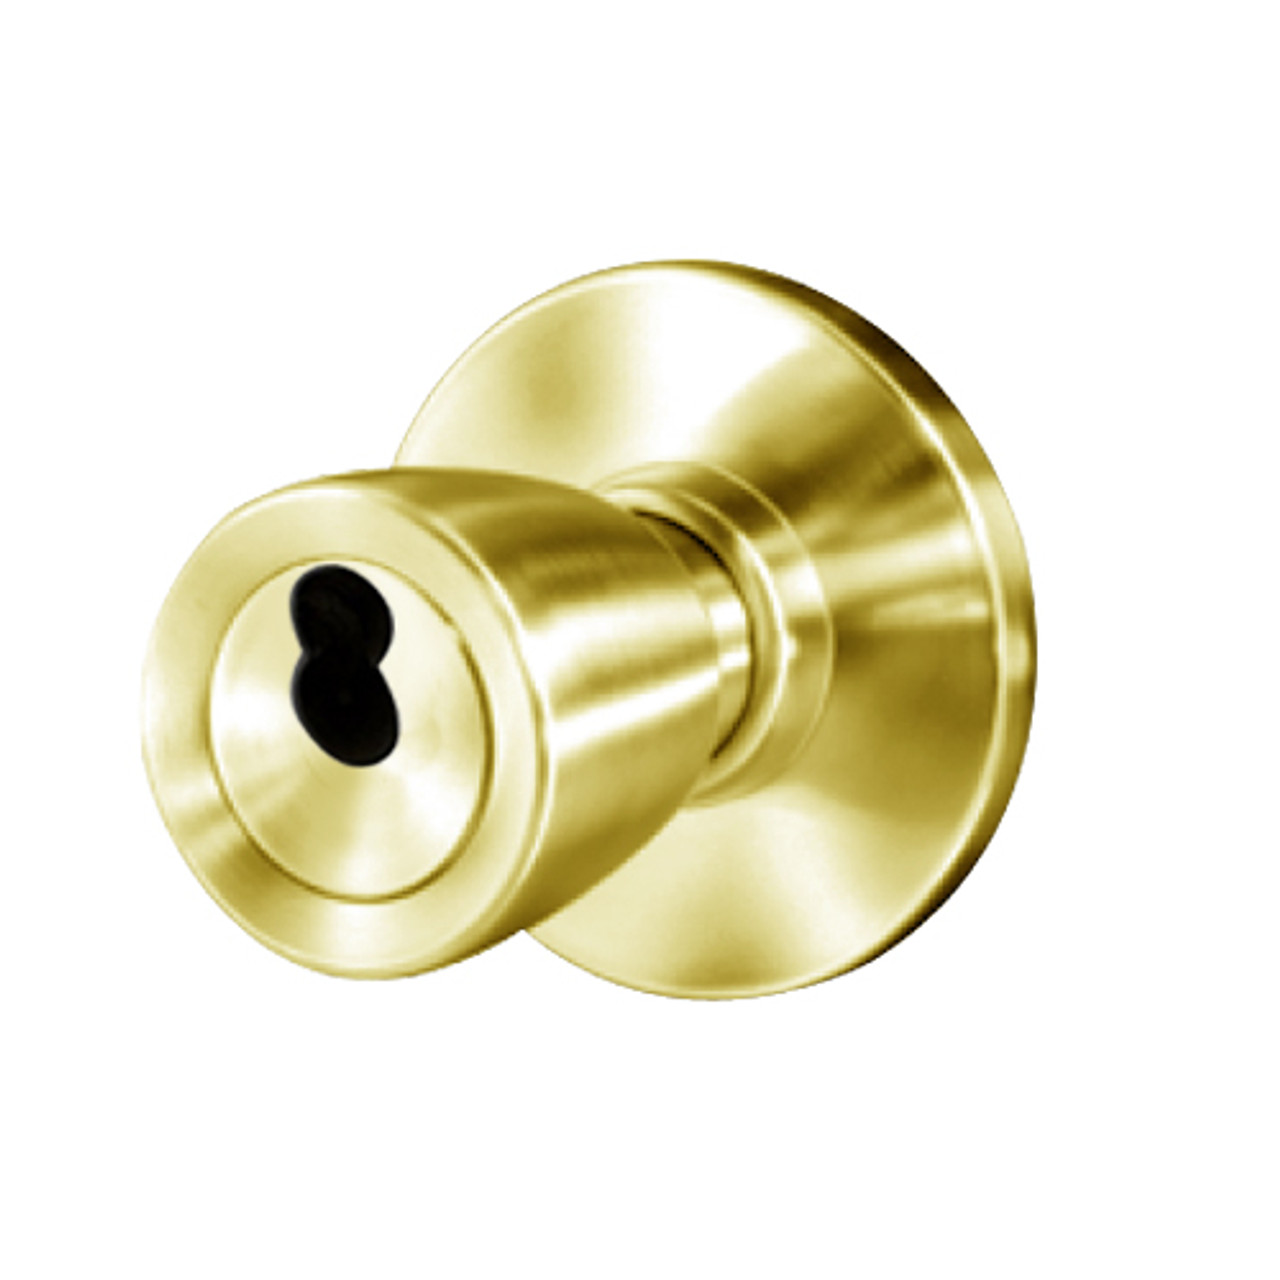 8K37C6AS3605 Best 8K Series Apartment Heavy Duty Cylindrical Knob Locks with Tulip Style in Bright Brass